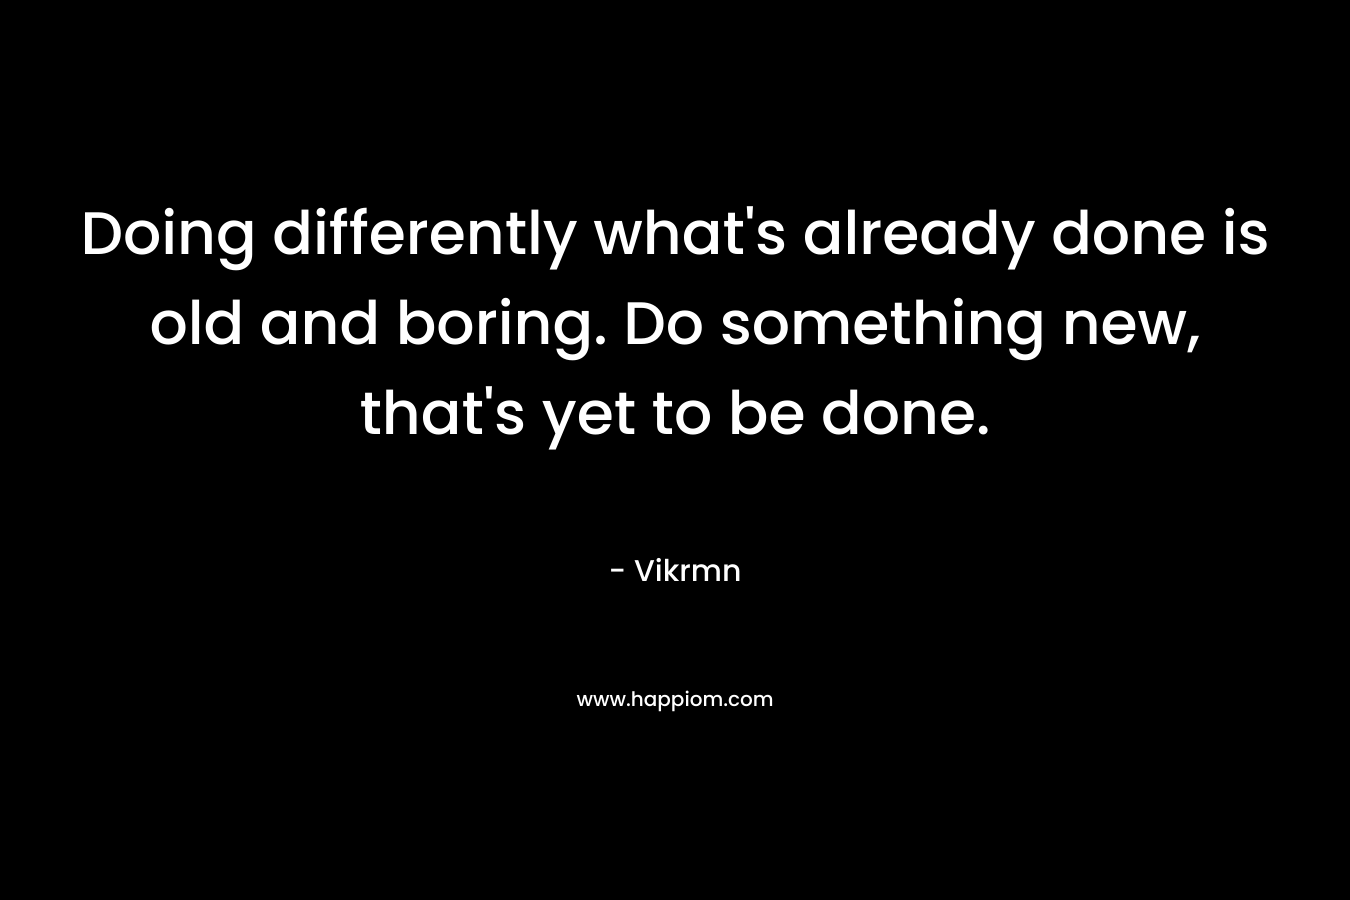 Doing differently what's already done is old and boring. Do something new, that's yet to be done.